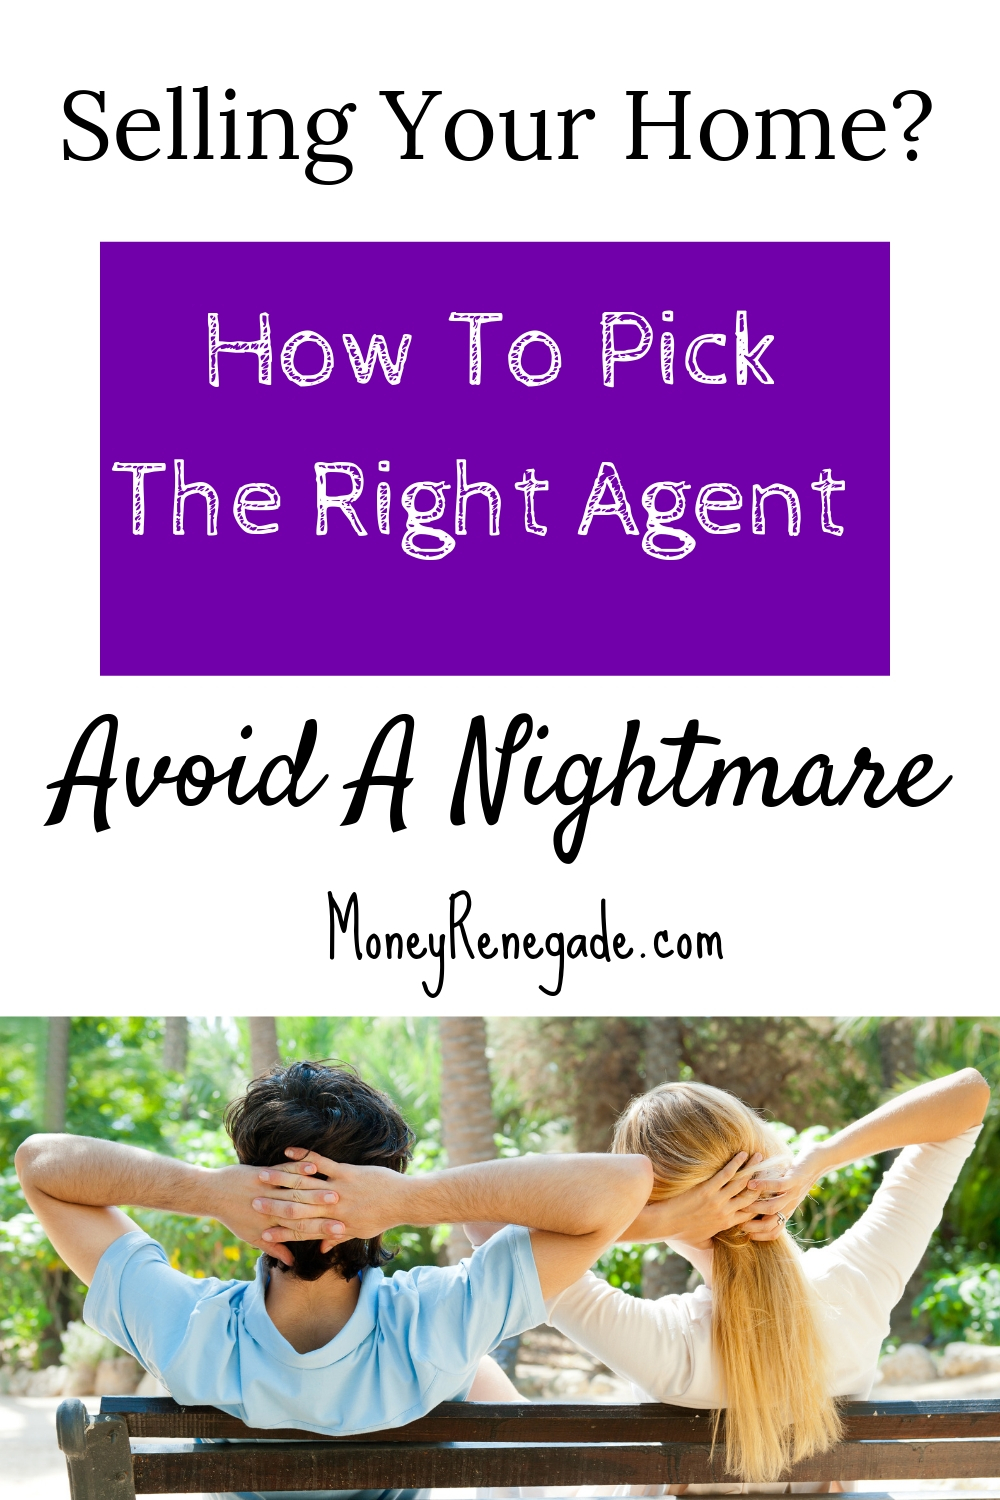 How to Pick the Right Real Estate Agent